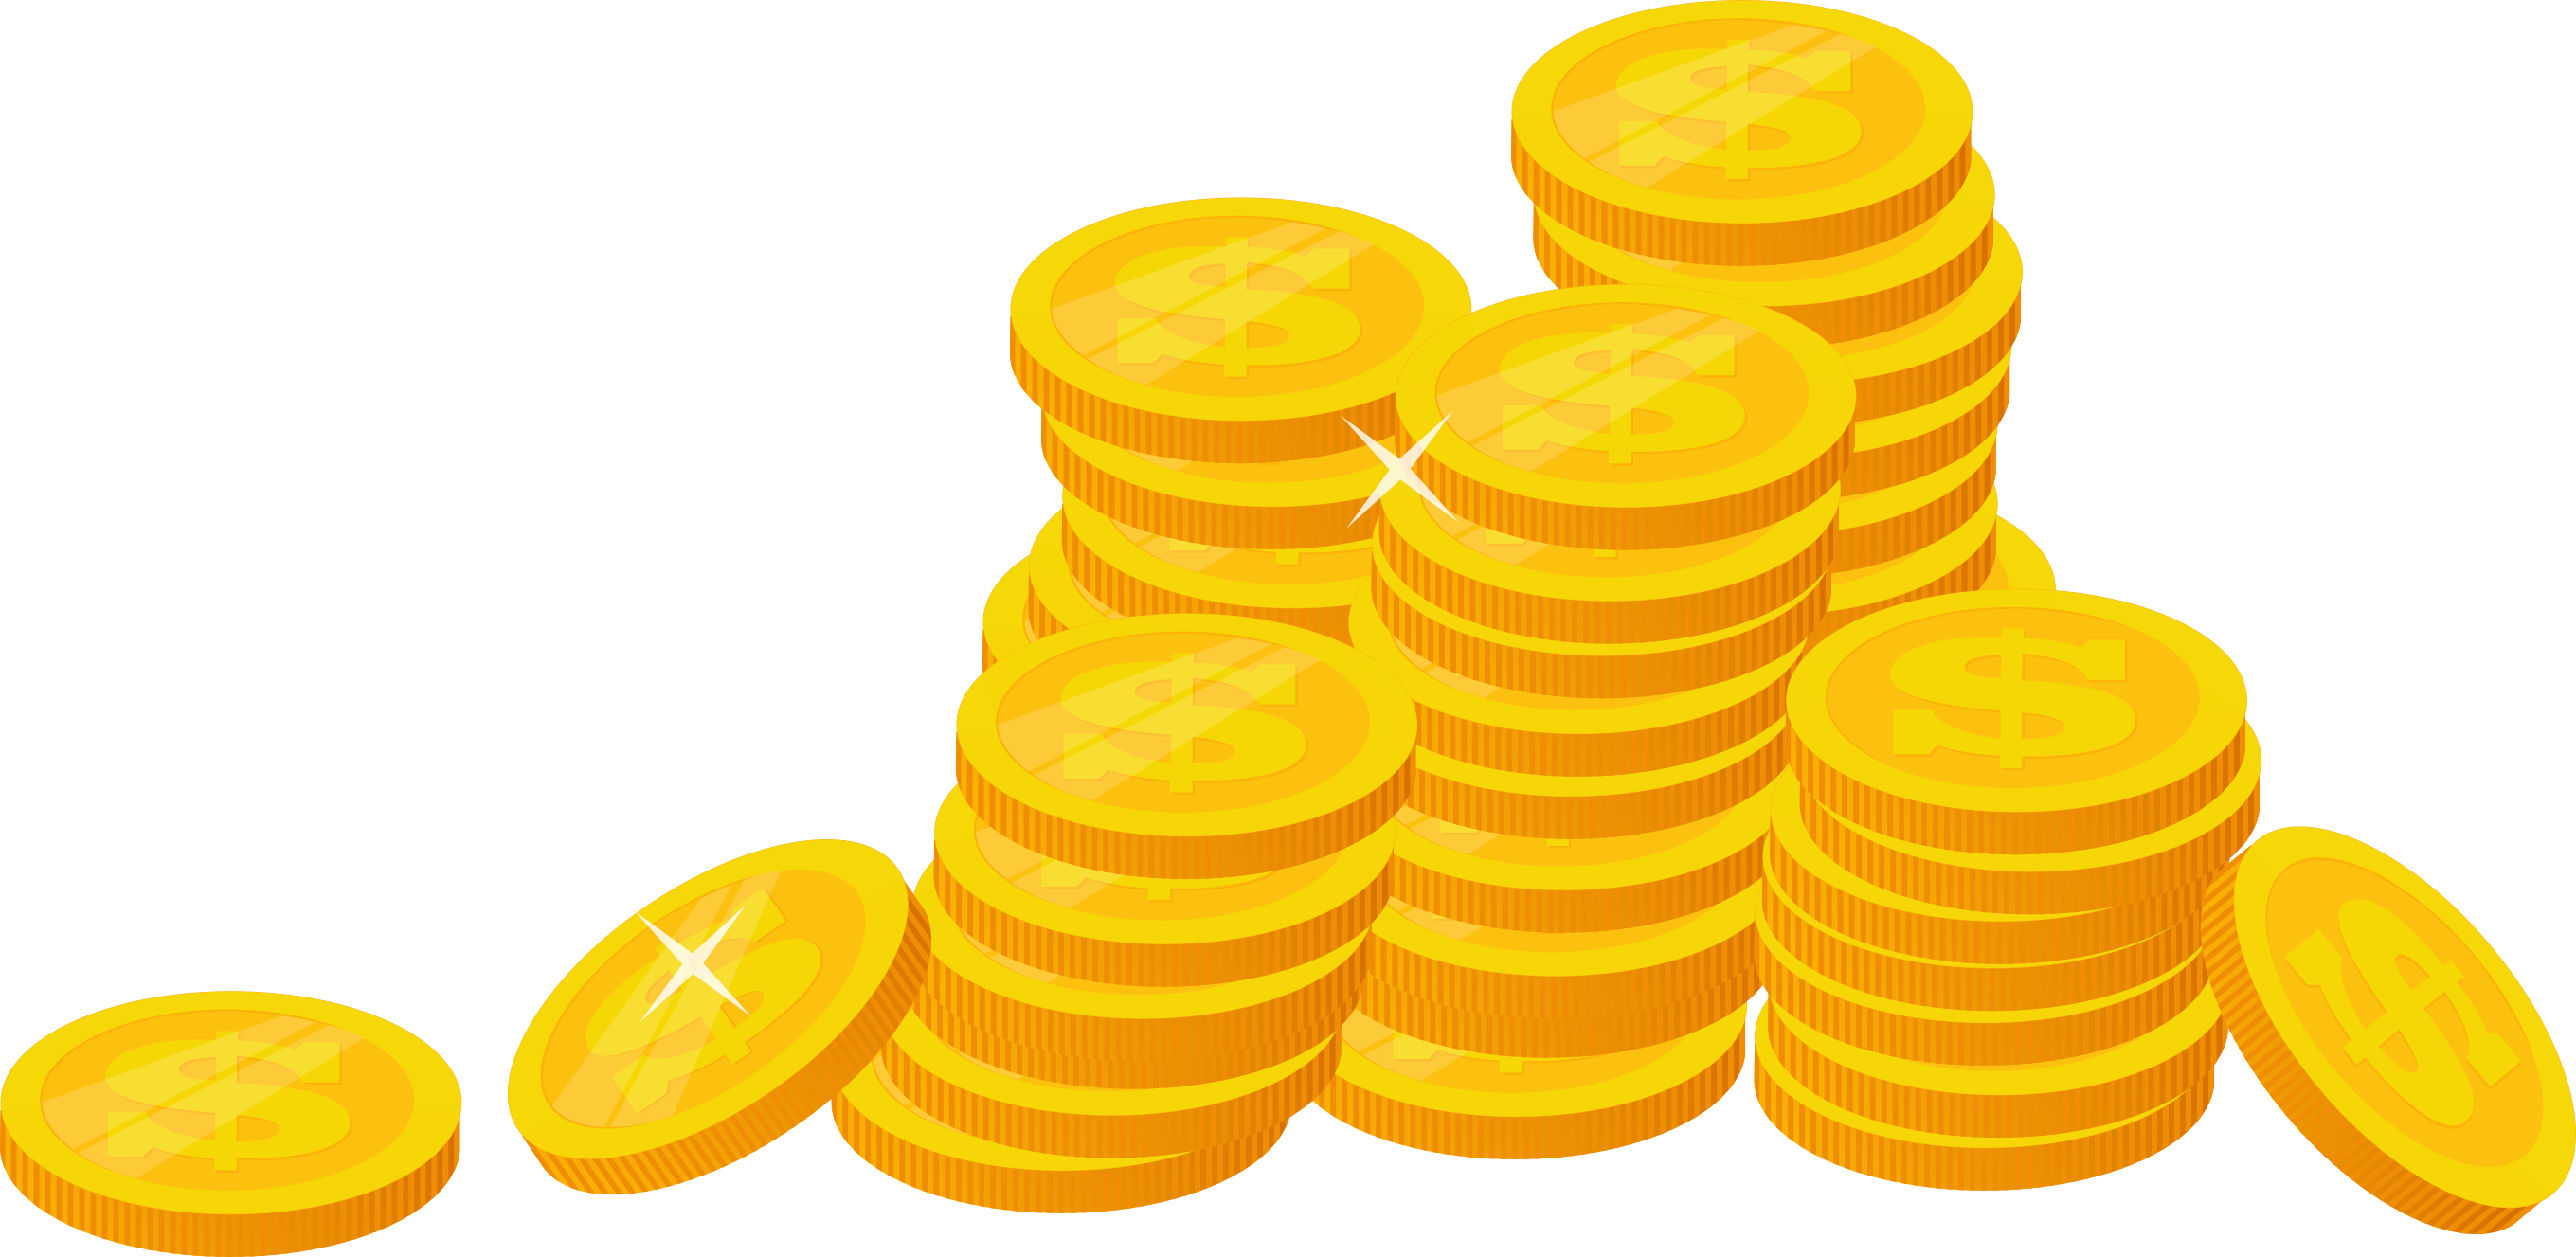 Coin Stack PNG Free Image